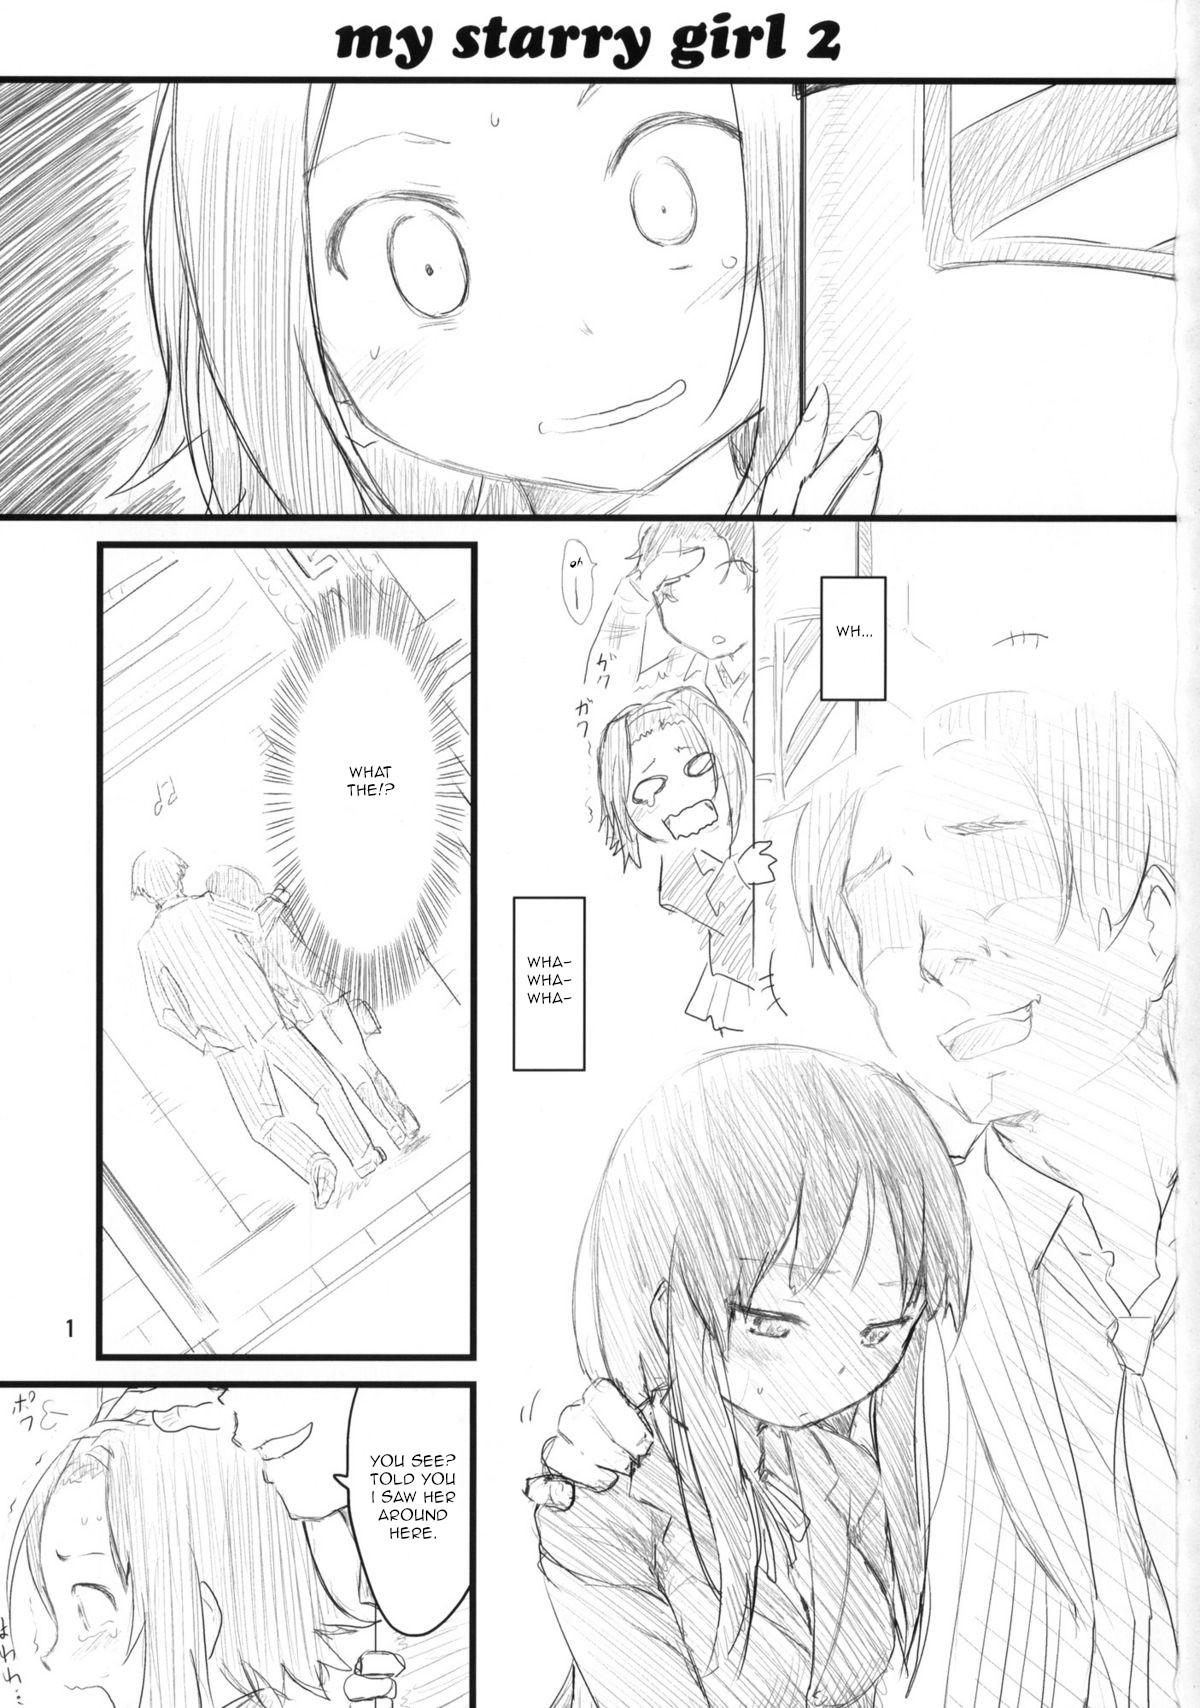 Redhead MY STARRY GIRL 2 - K-on Lovers - Page 2